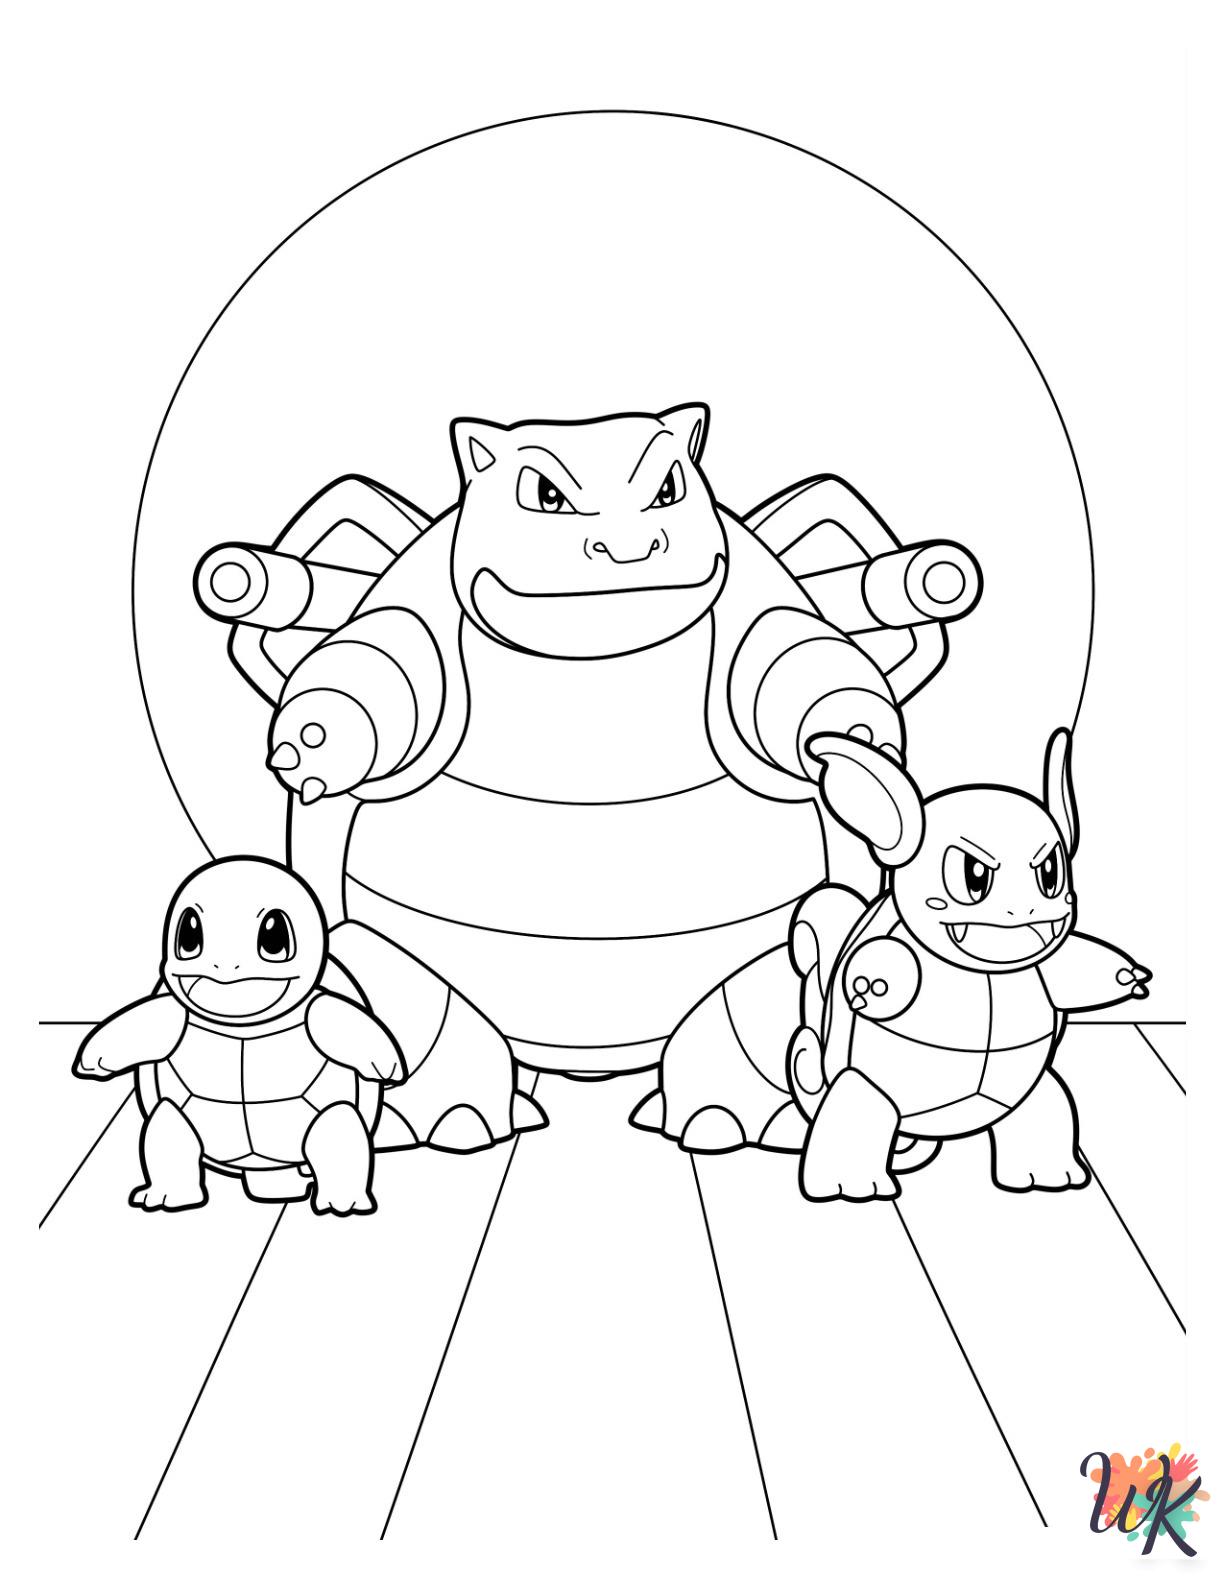 Squirtle coloring pages for adults